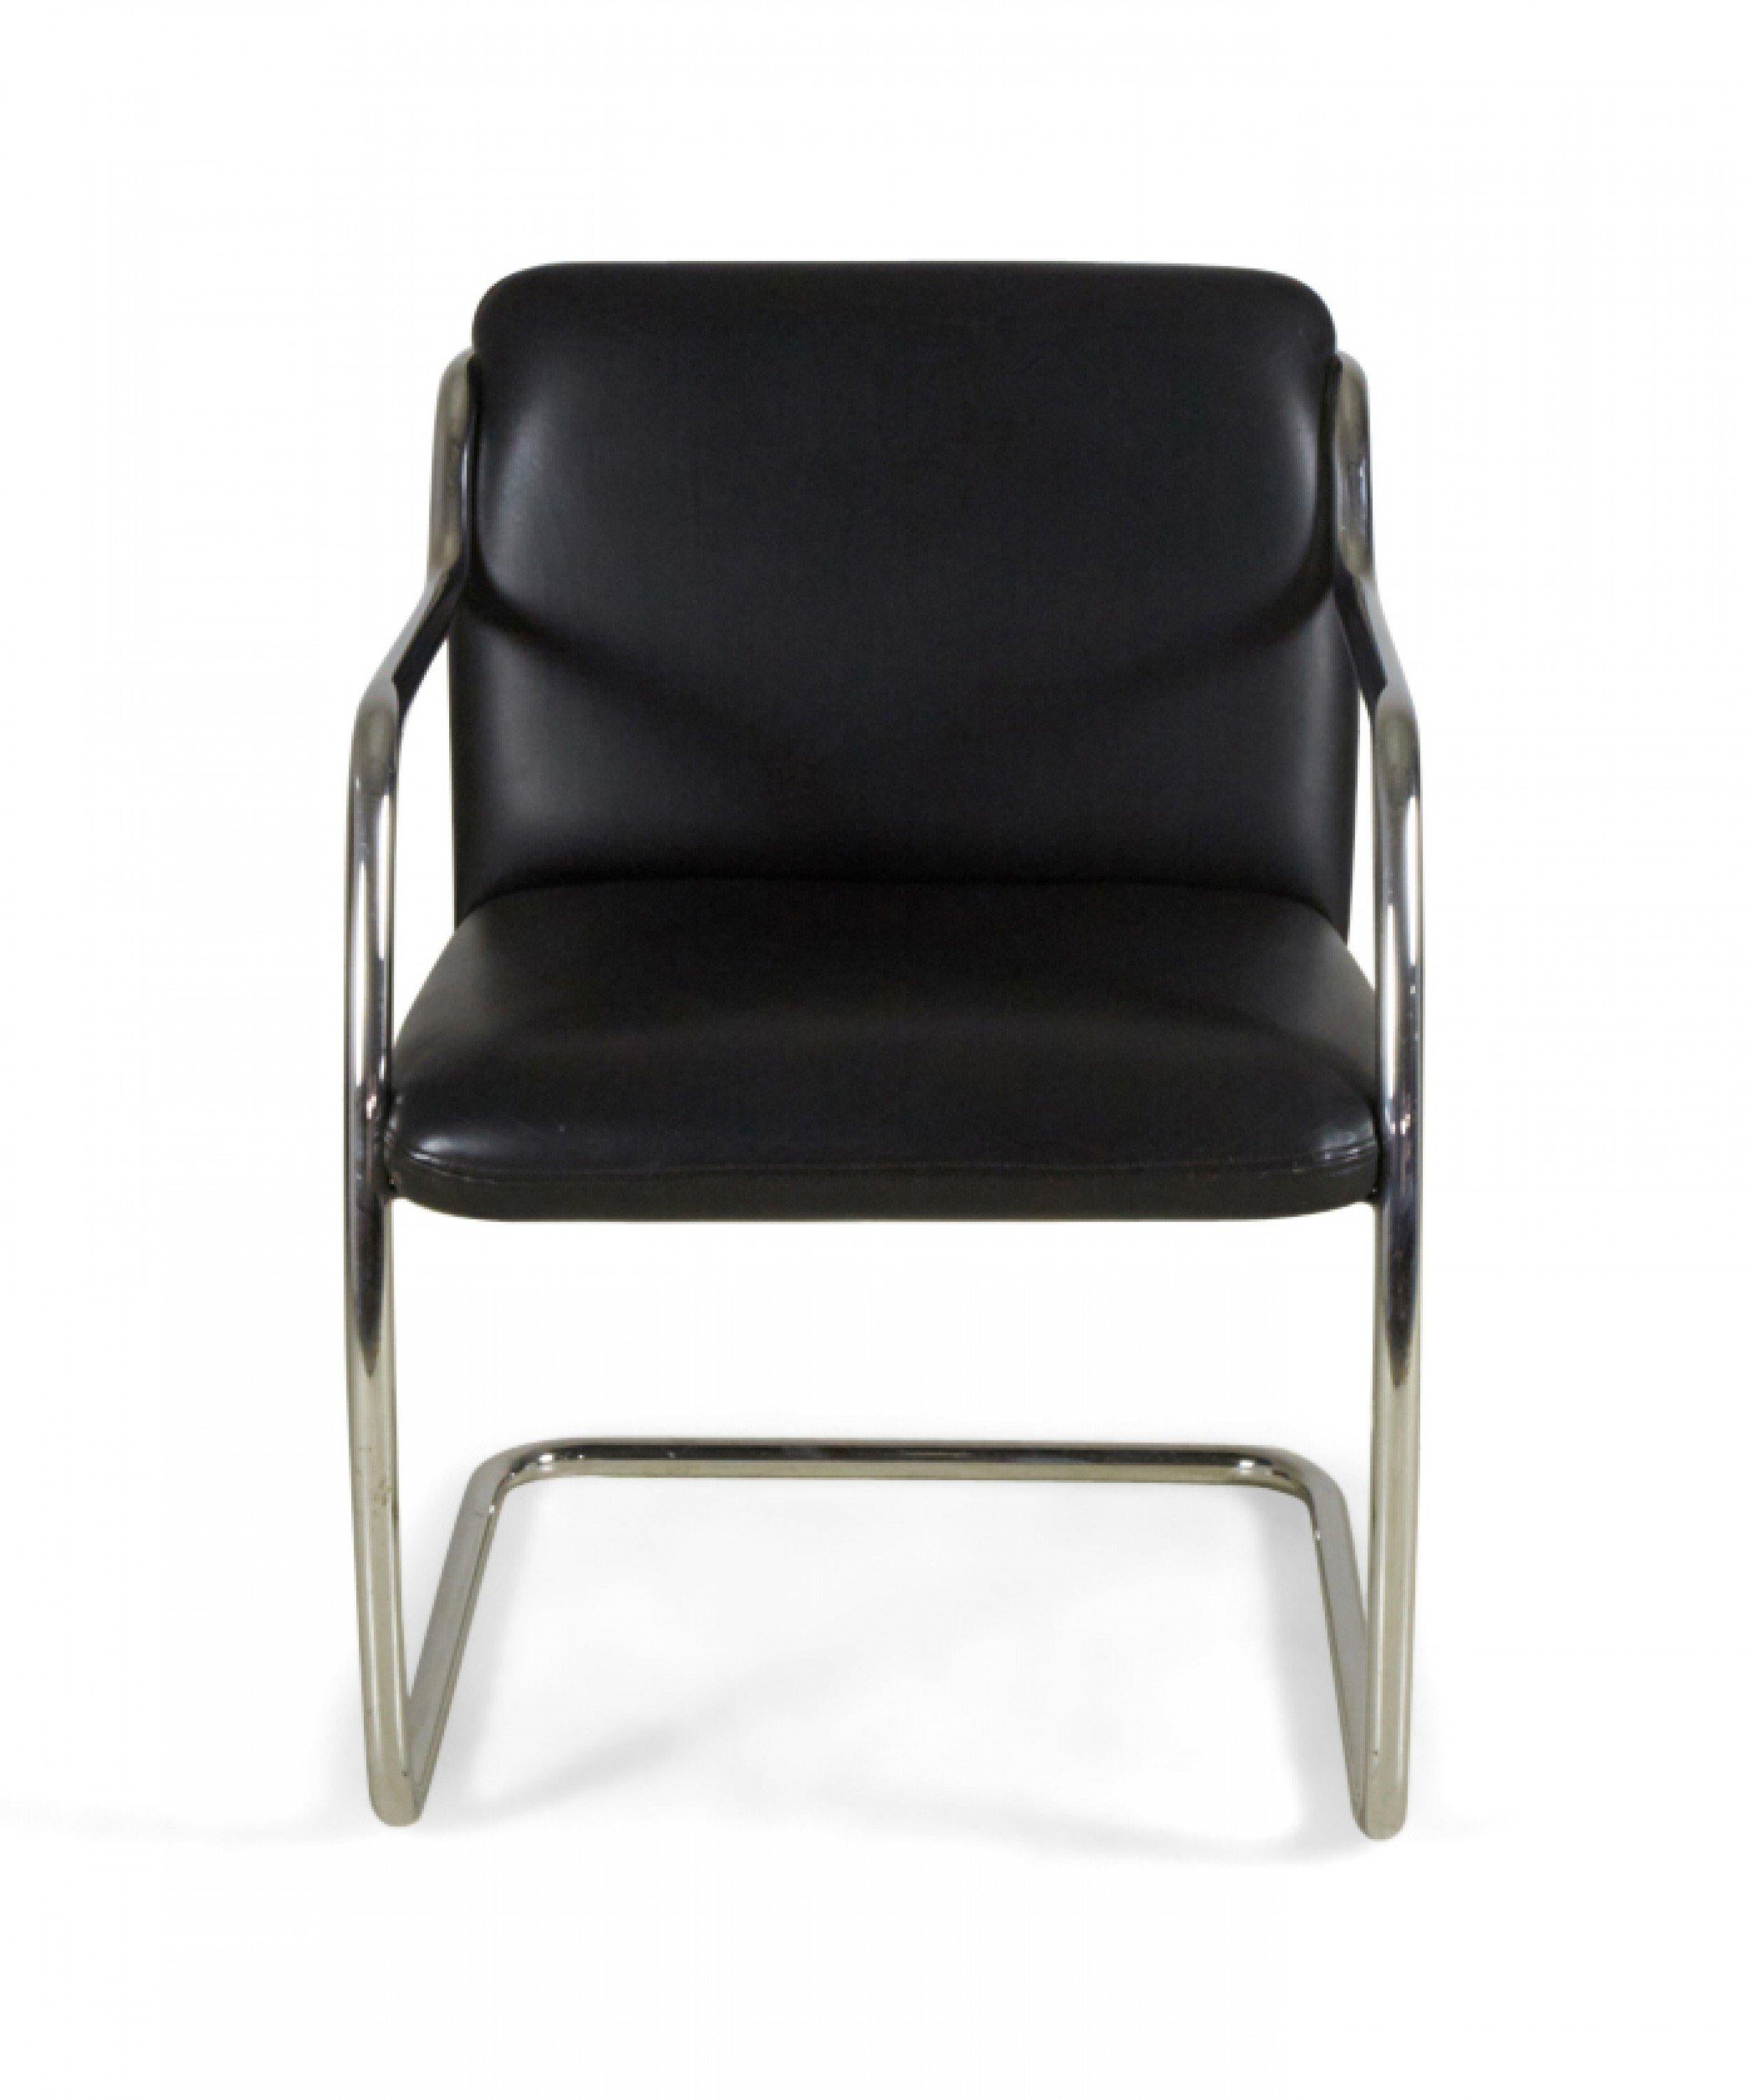 American Pair of Brueton Contemporary Black Leather and Steel Tube Frame Armchairs For Sale